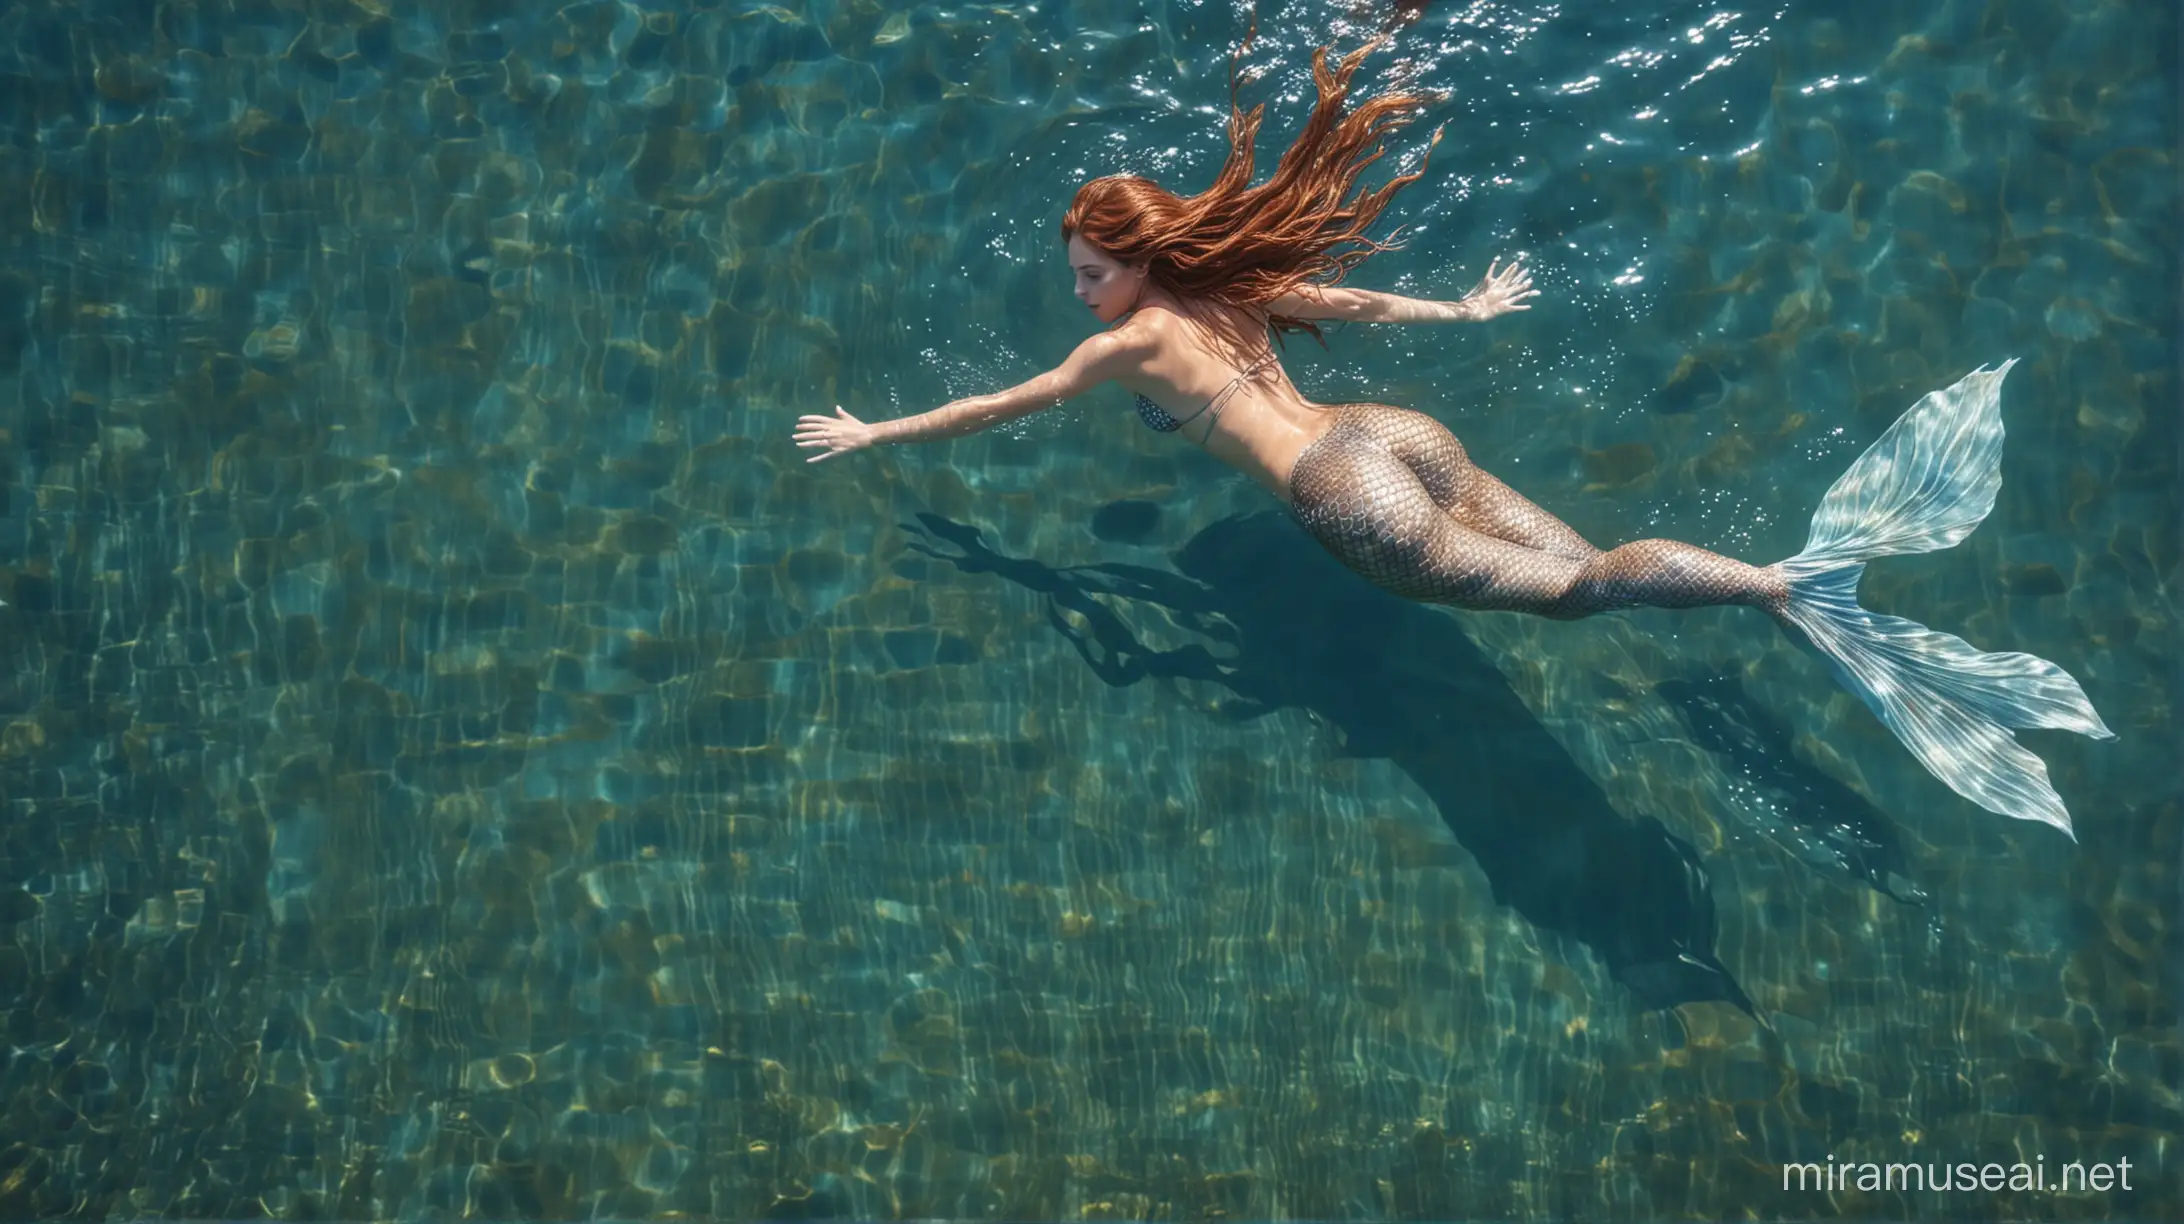 Overhead view of a beautiful mermaid with flowing brown hair. Blue translucent water. She is swimming on the surface of the water. Full body picture. She is swimming facing down so we see her back. 